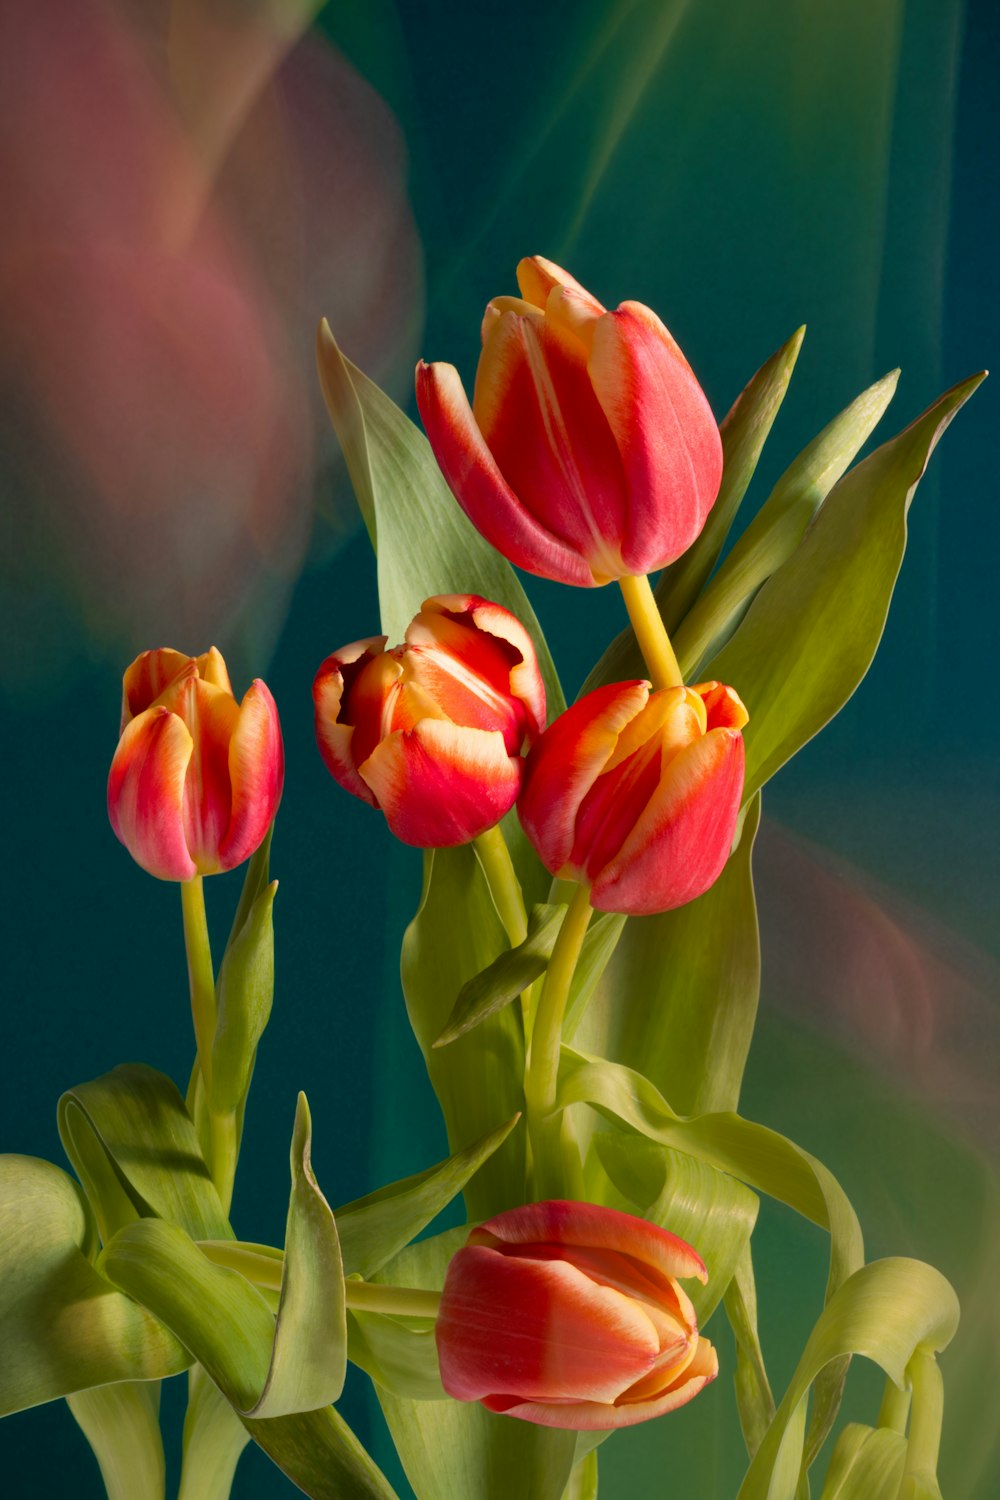 a bunch of red and yellow tulips in a vase